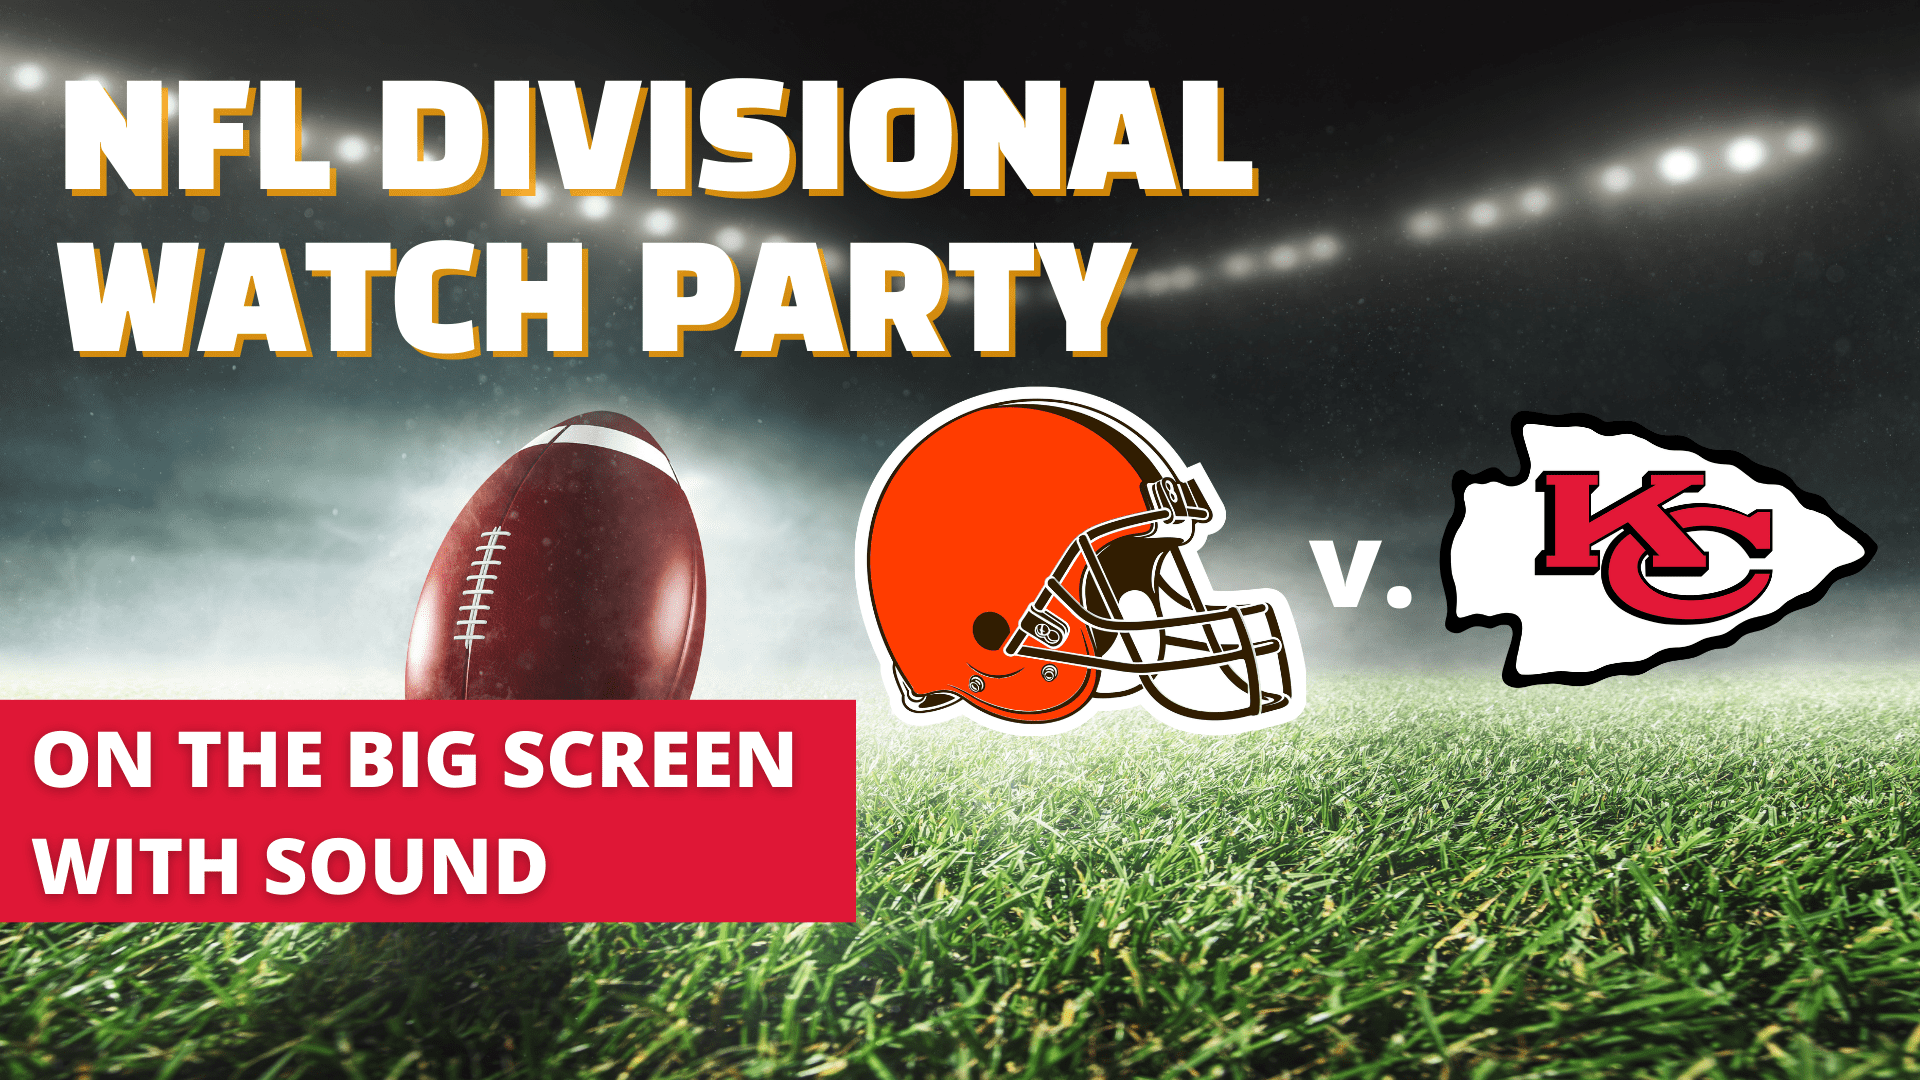 Browns vs. Chiefs Watch Party - hero